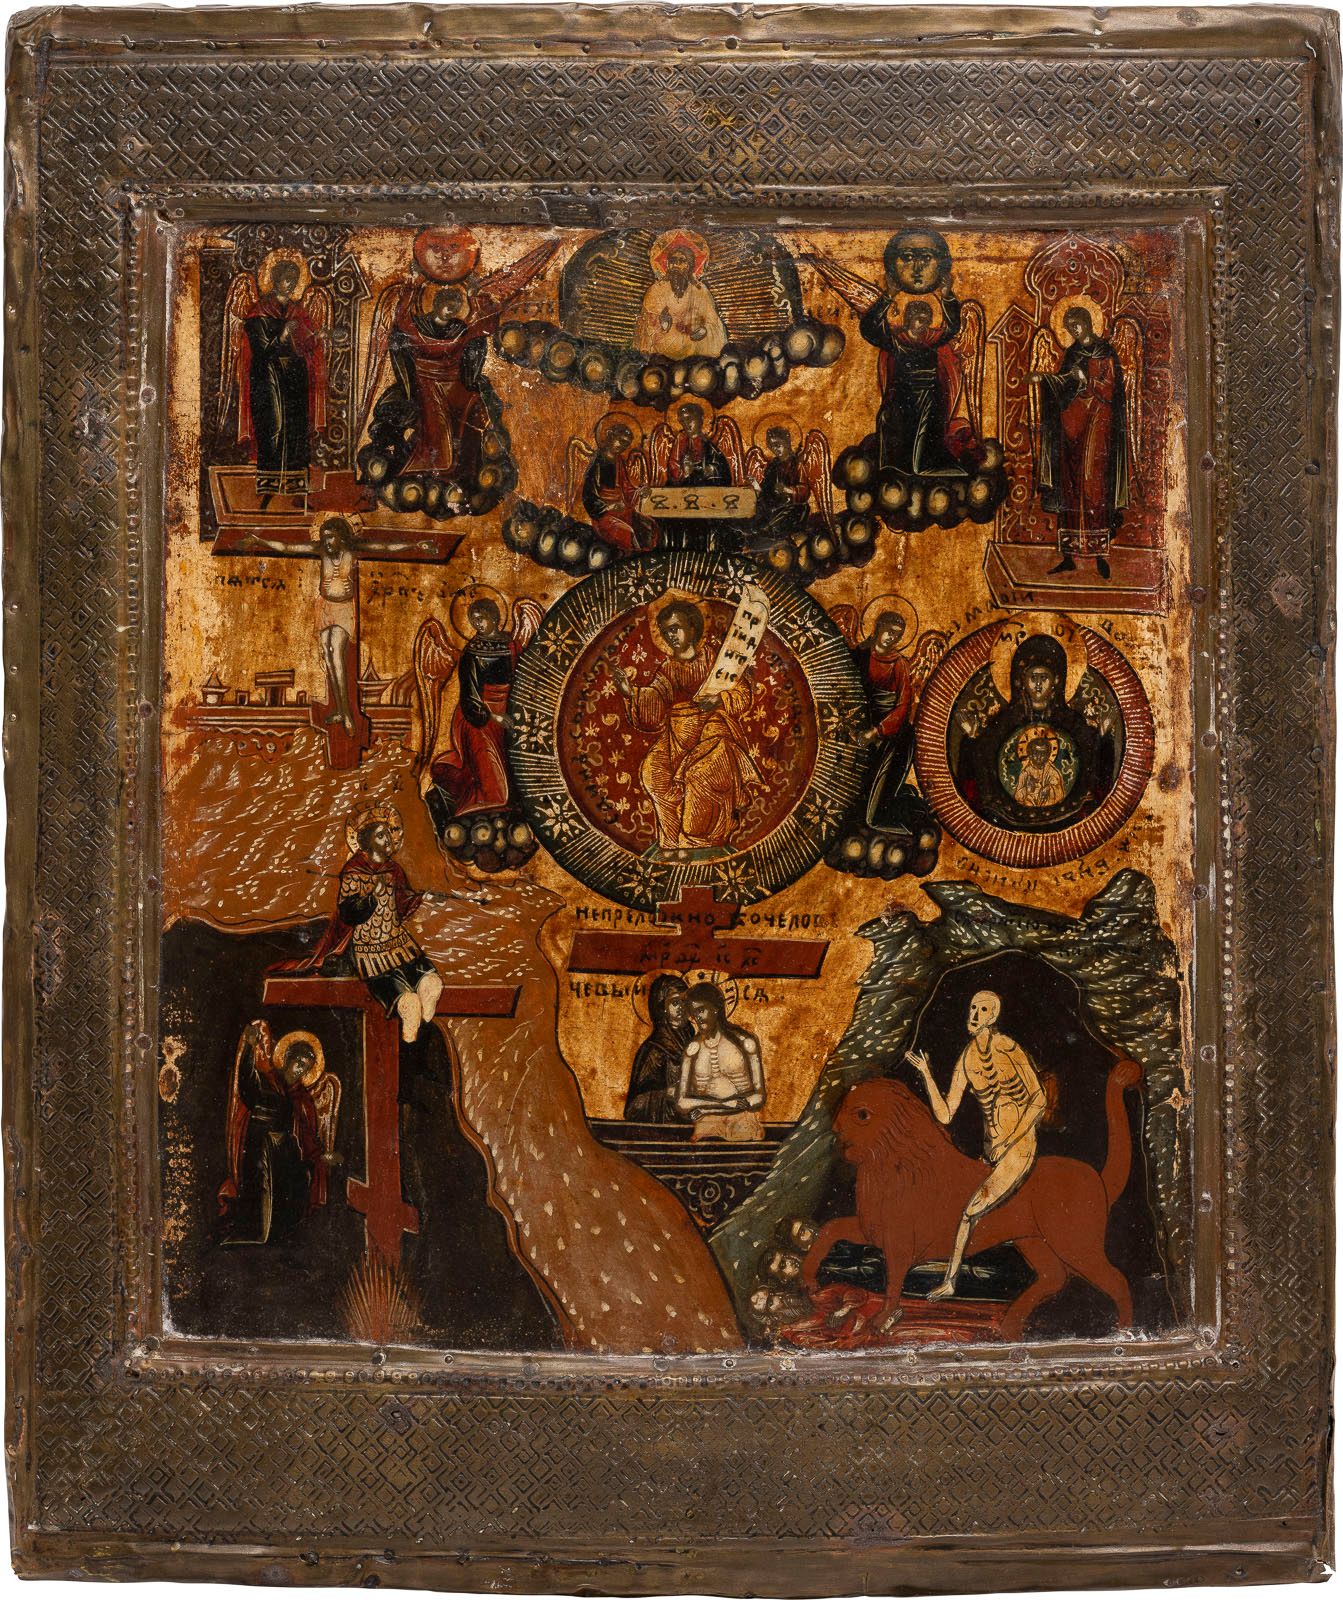 A RARE ICON SHOWING CHRIST 'ONLY BEGOTTEN SON' WITH A BASMA A RARE ICON SHOWING &hellip;